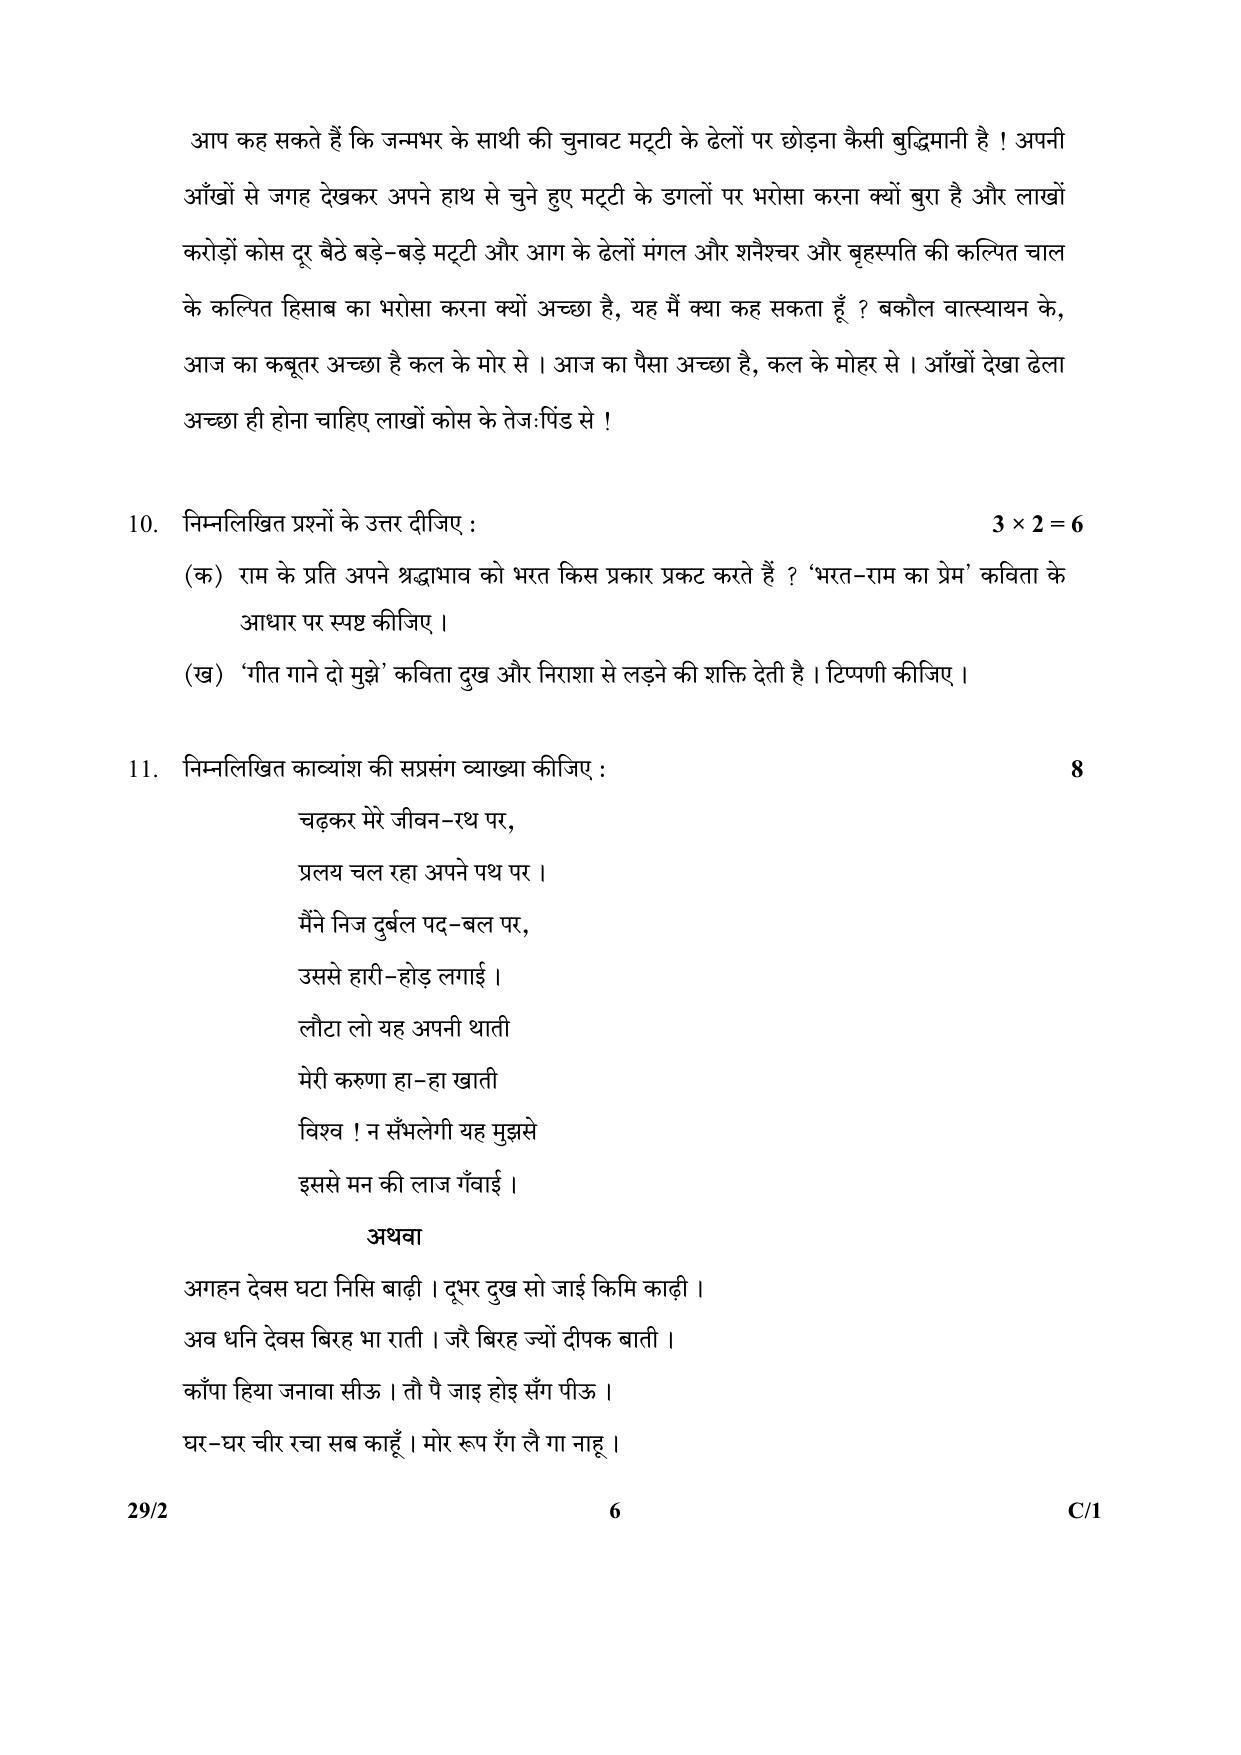 CBSE Class 12 29-2 (Hindi Elective) 2018 Compartment Question Paper - Page 6